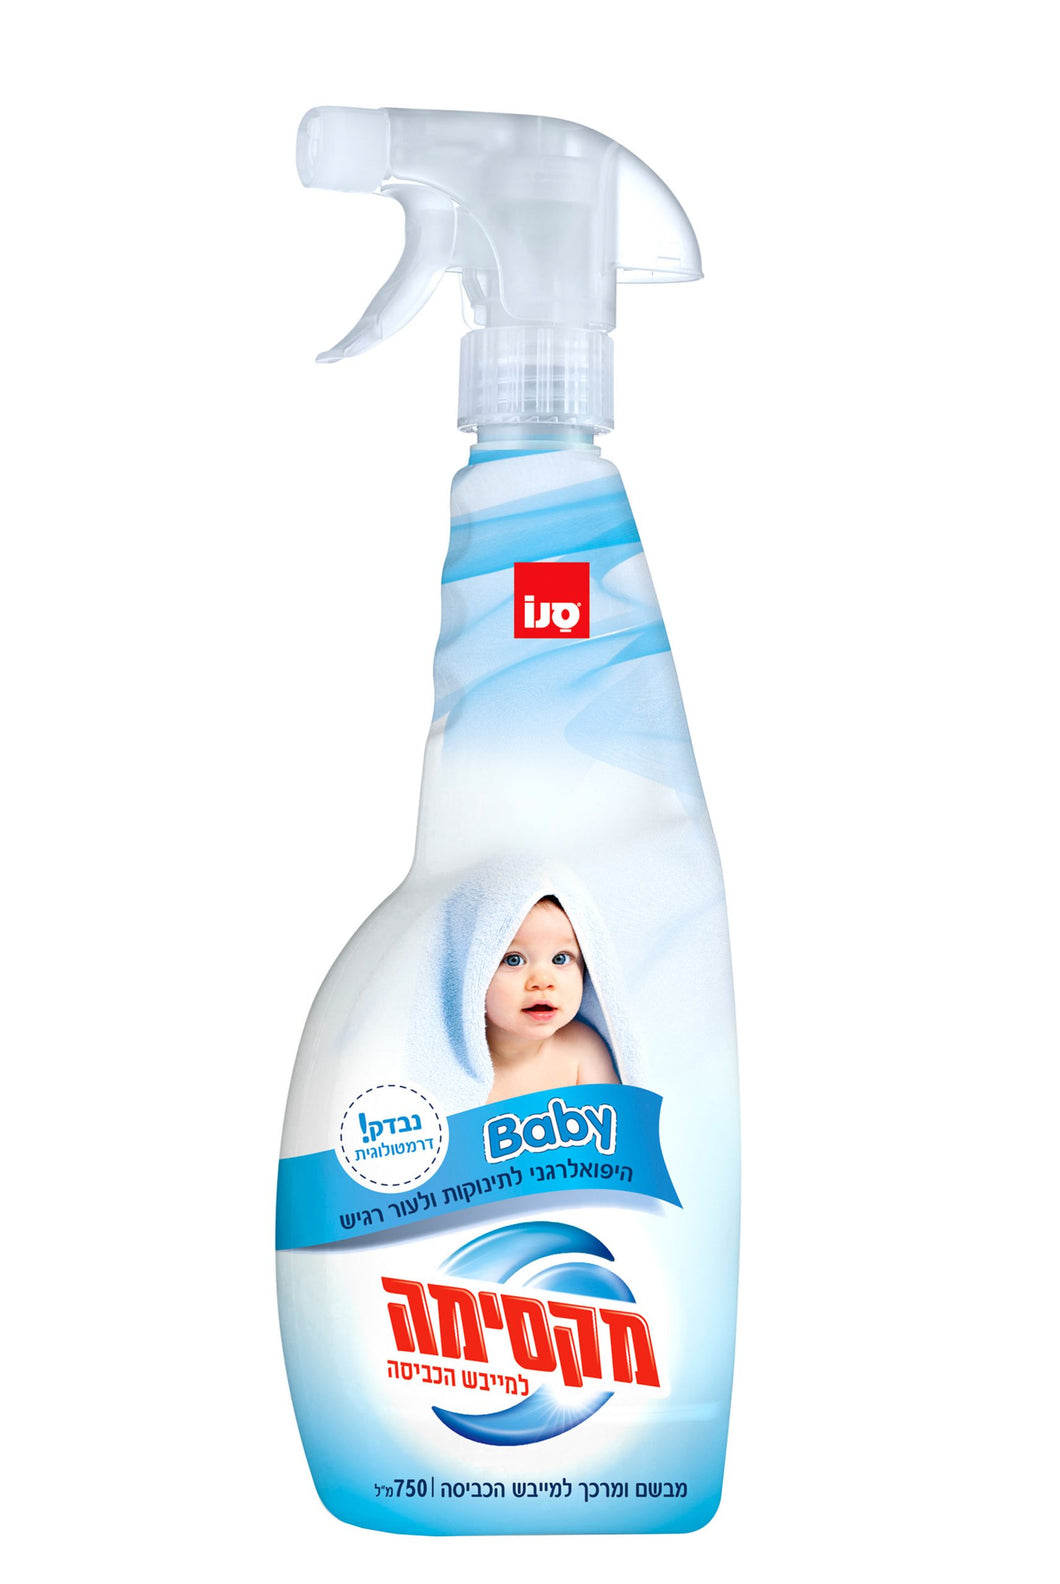 Sano Maxima Fragrance for the Dryer – Baby | 750 ml | Gentle Freshness for Delicate Clothes